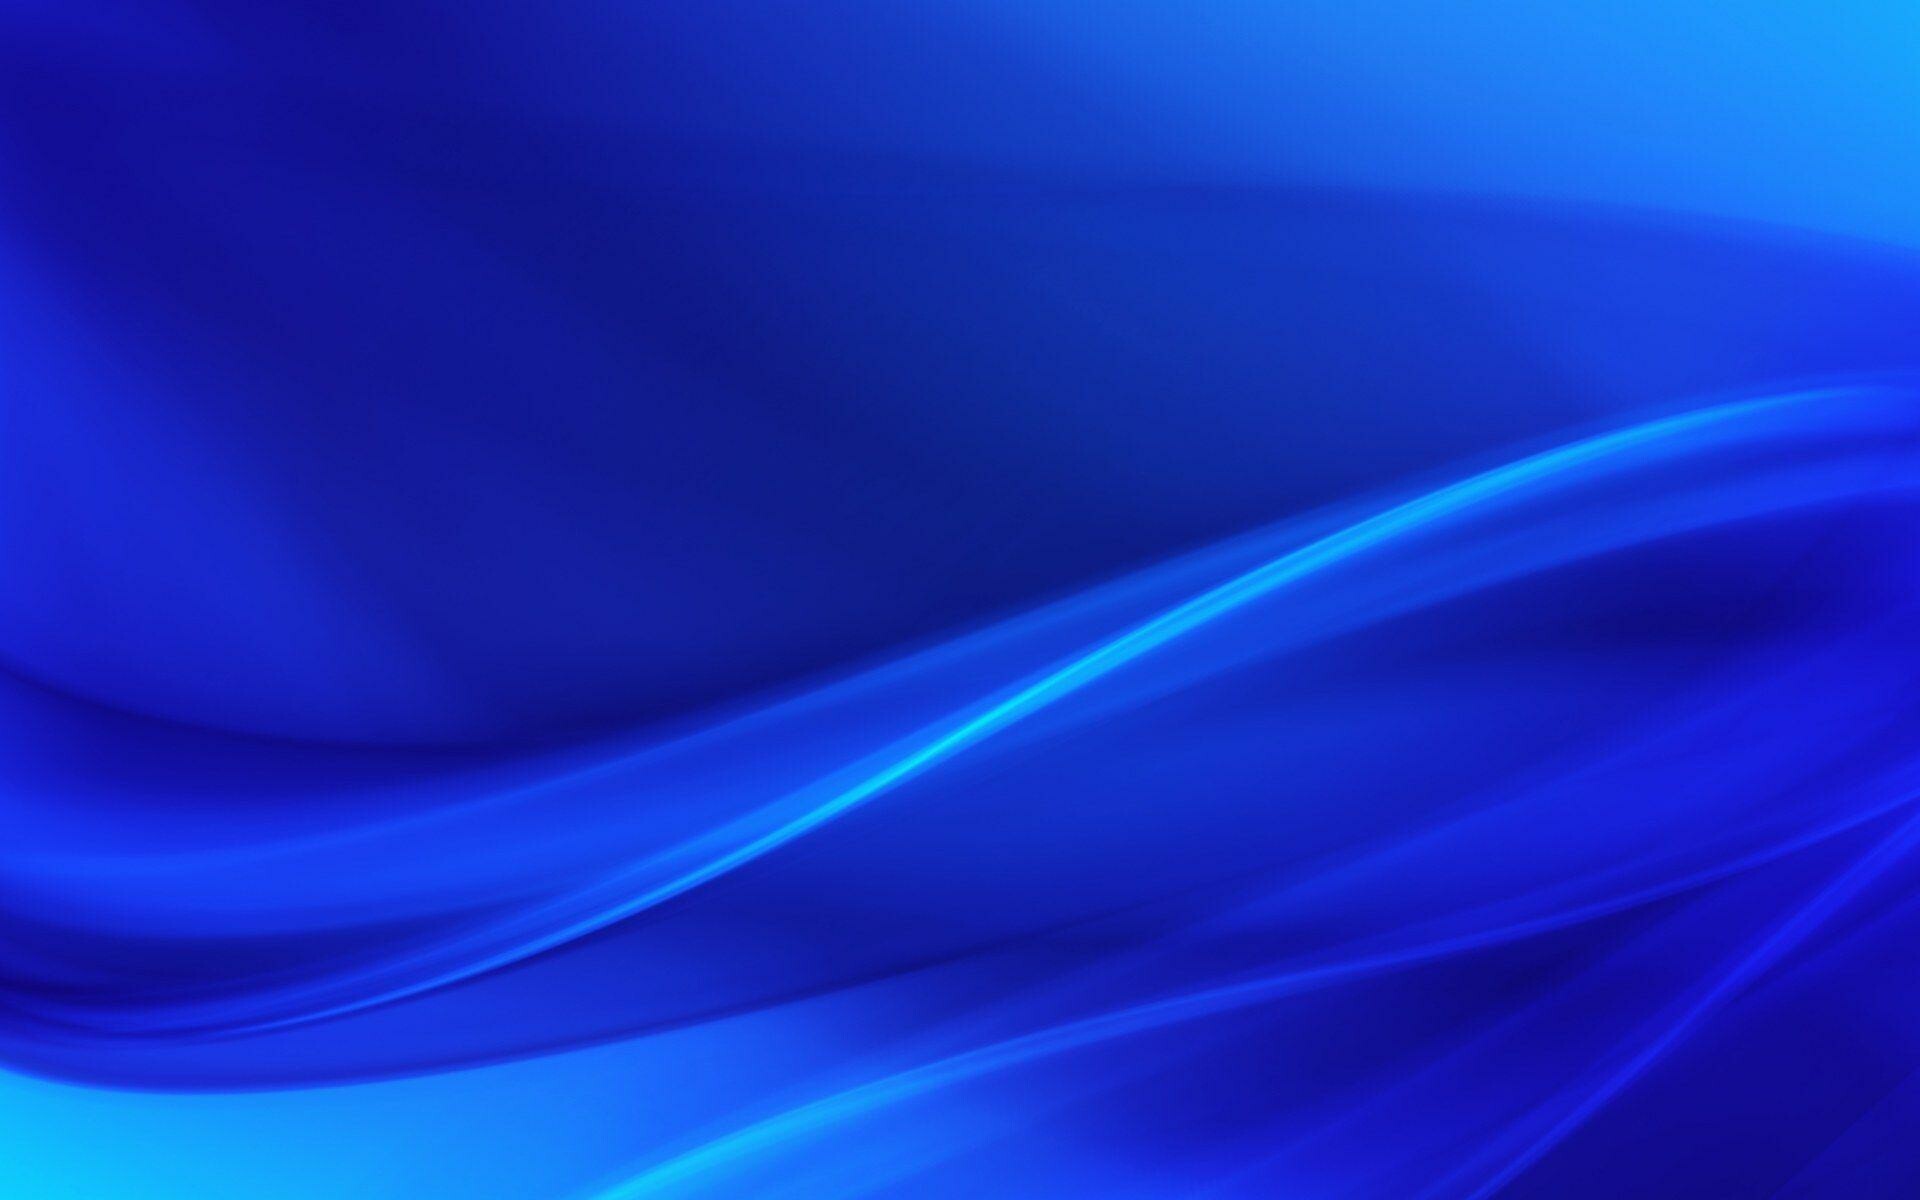 46+ Blue Wallpapers: HD, 4K, 5K for PC and Mobile | Download free images  for iPhone, Android